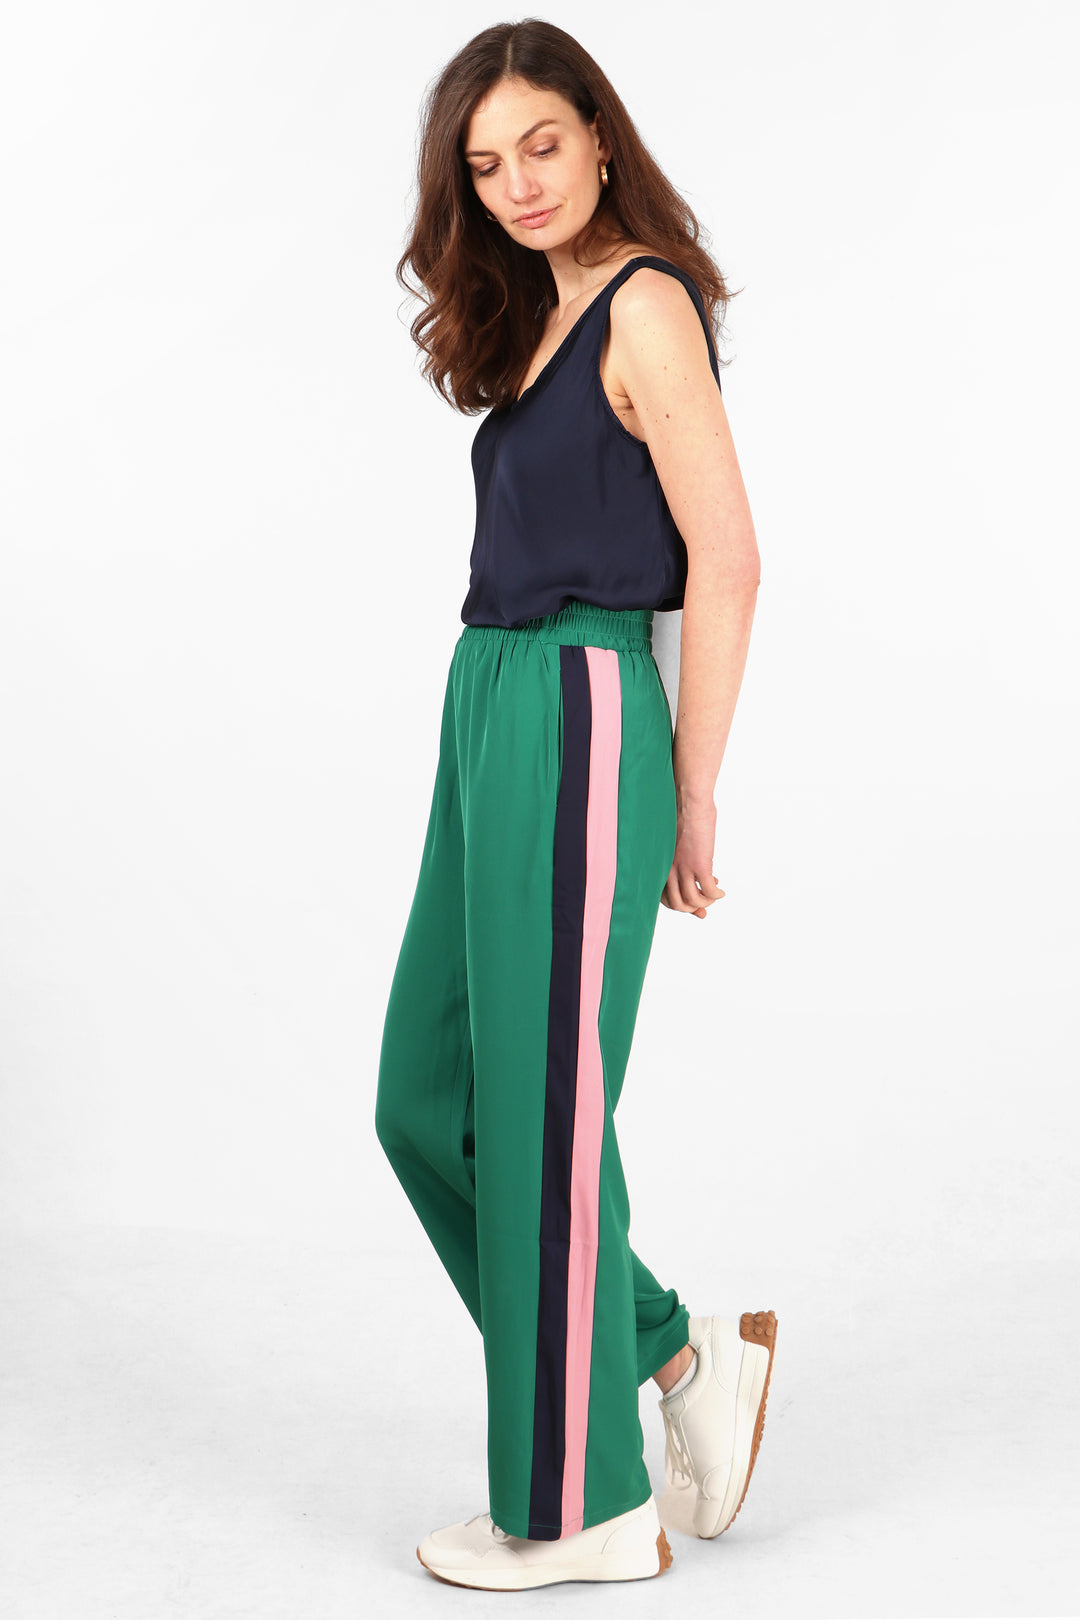 model wearing long green trousers with navy blue and pink stripe running the length of the leg at the side of the trousers